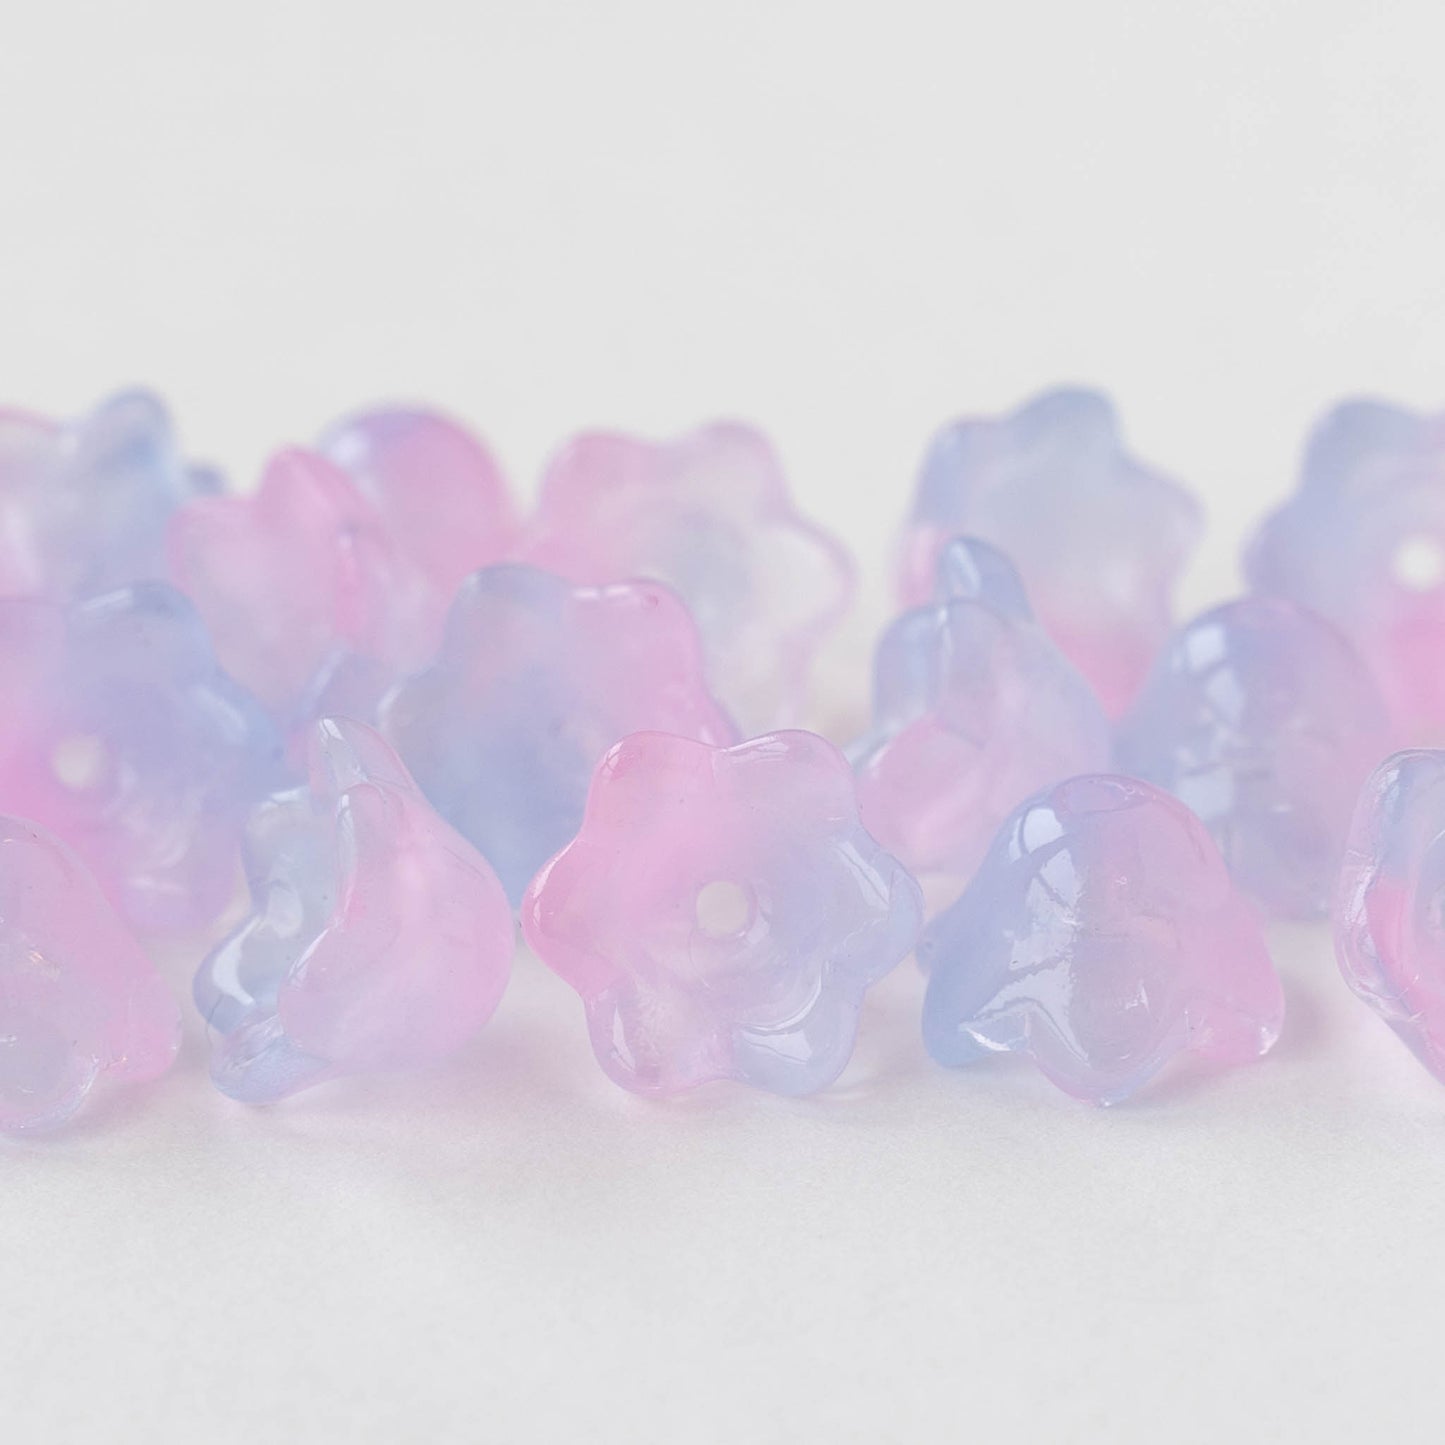 Load image into Gallery viewer, 7x12mm Flower Beads - Pink Lavender Mix - 30 Beads
